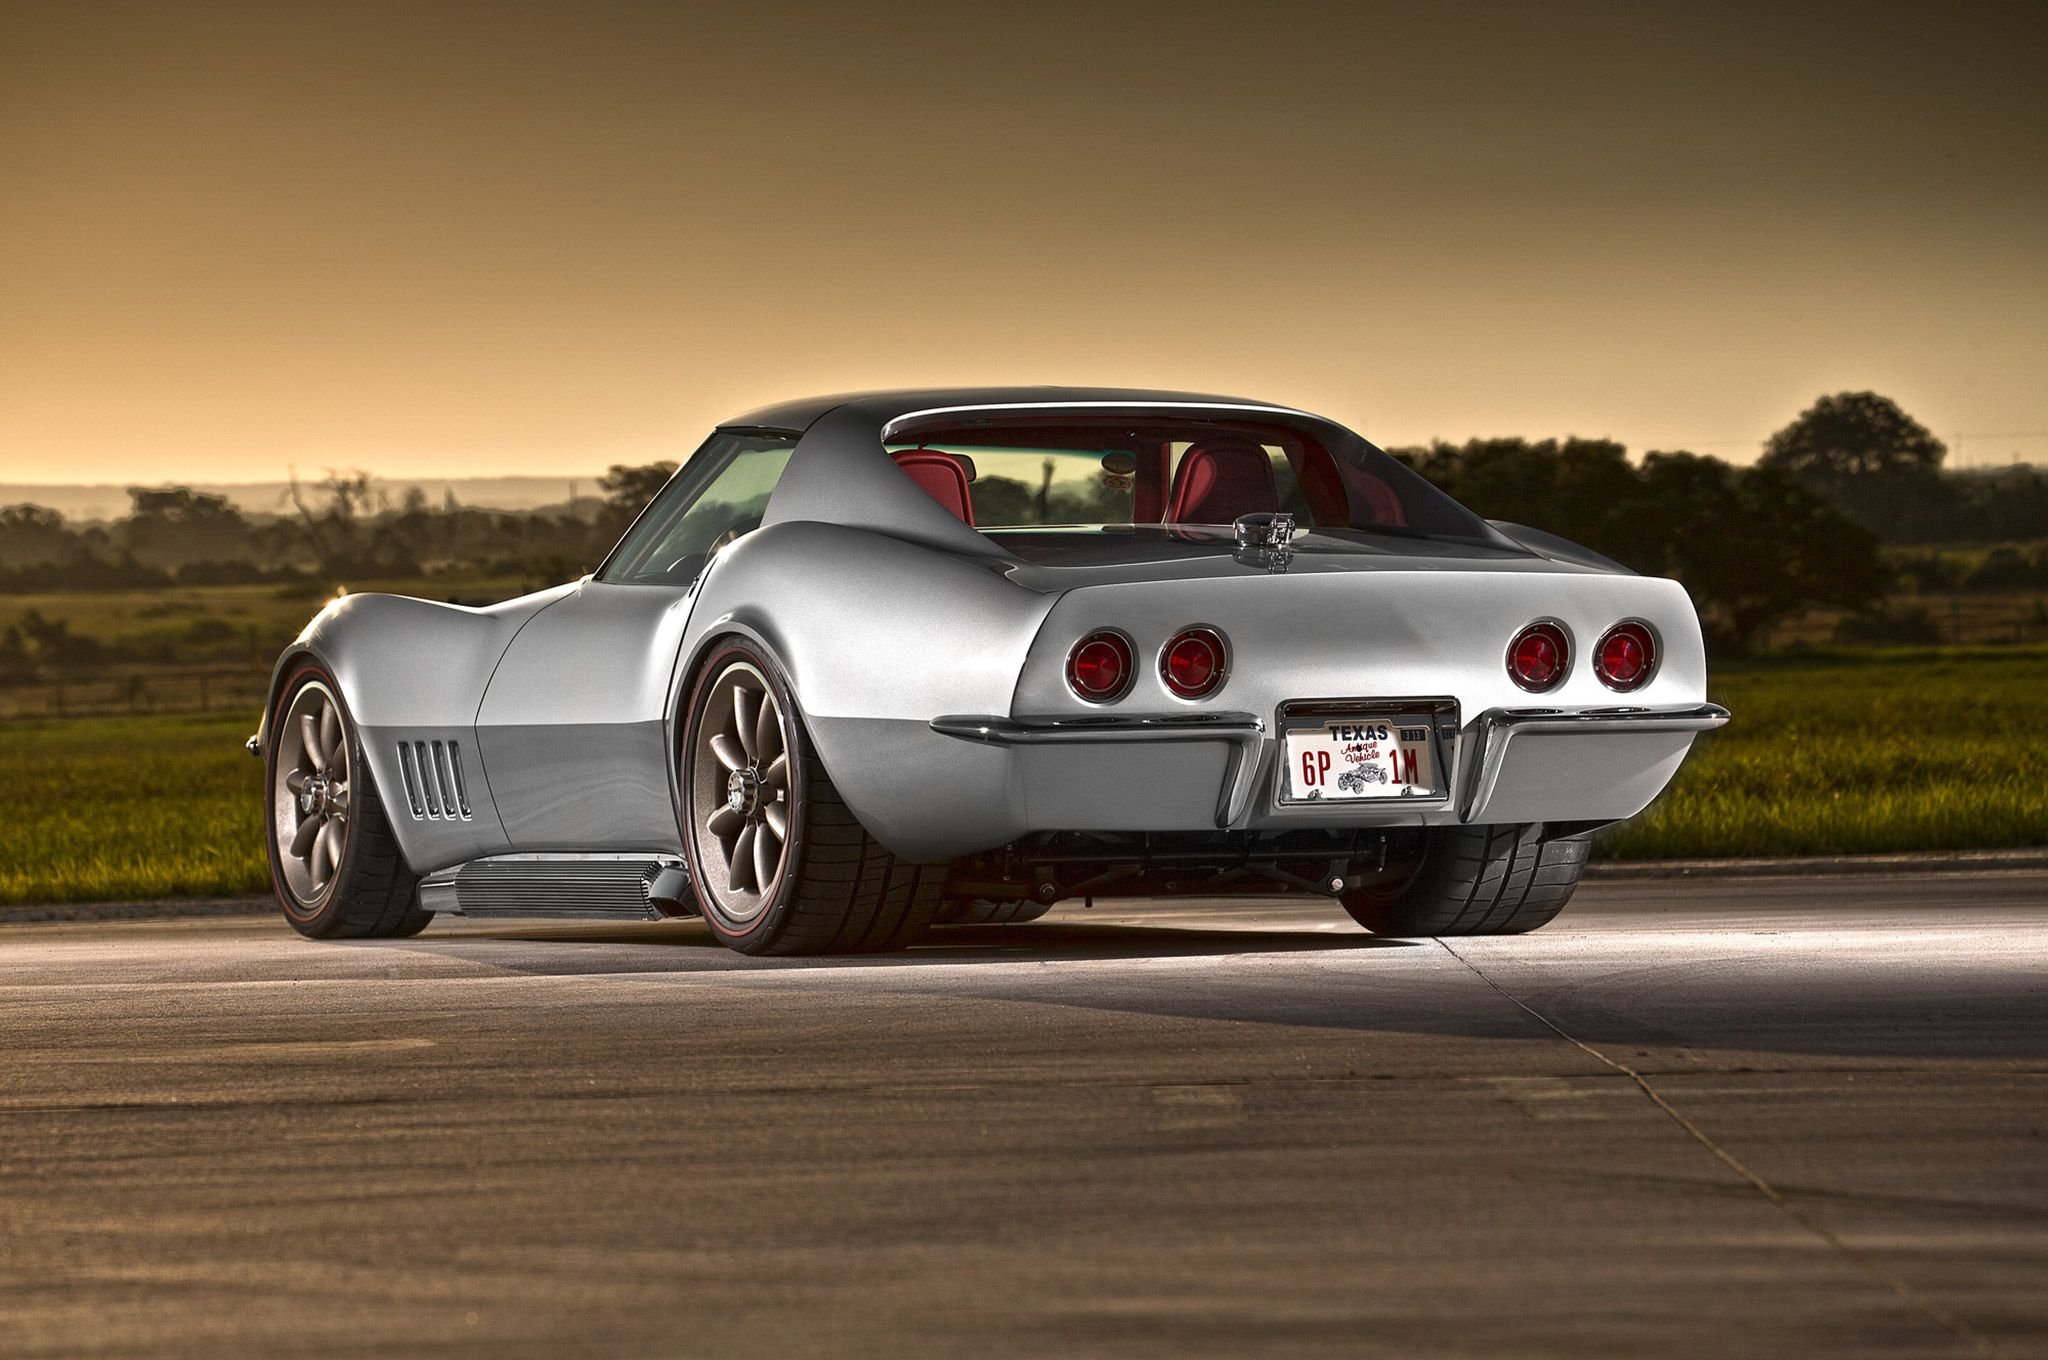 Touring Chevrolet Chevy Corvette Coupe C3 Wallpaper Background